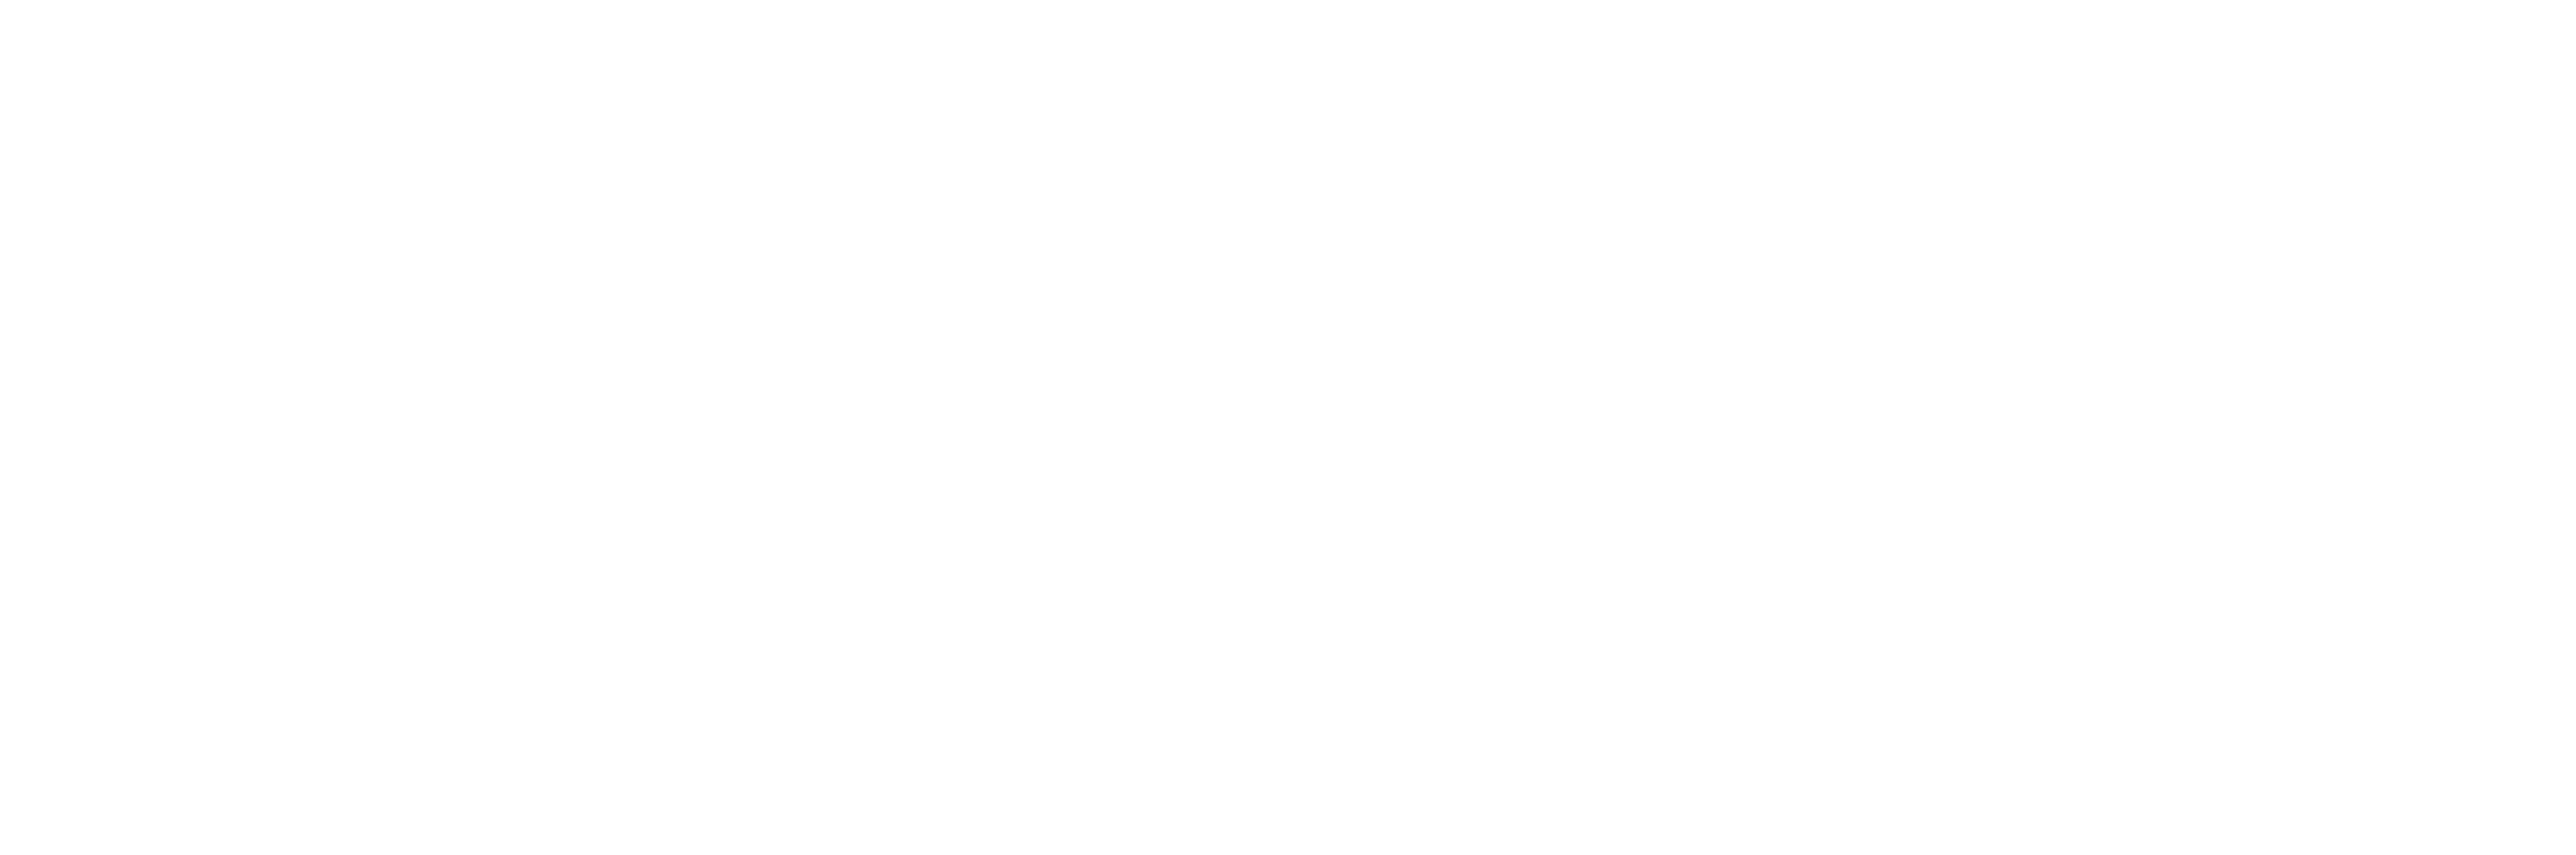 AIAG - Advancing Mobility - White